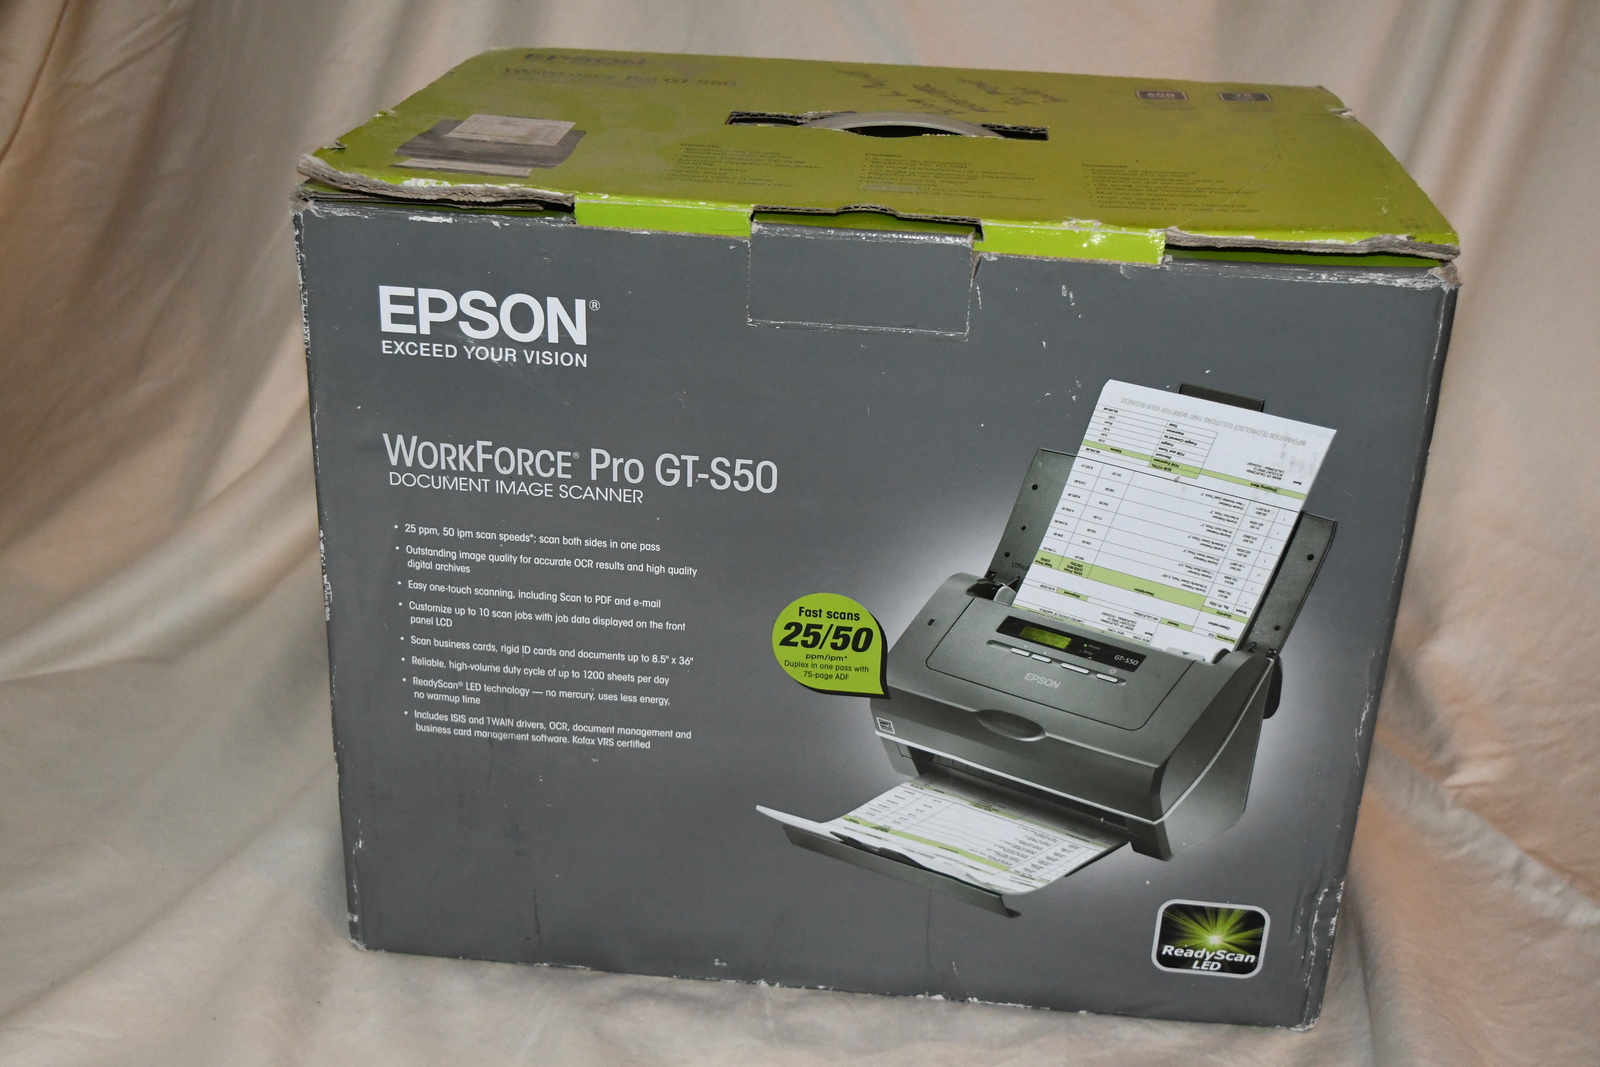 Primary image for Epson WorkForce B11B194011 Pro GT-S50 Document Scanner New 515c3 3/23